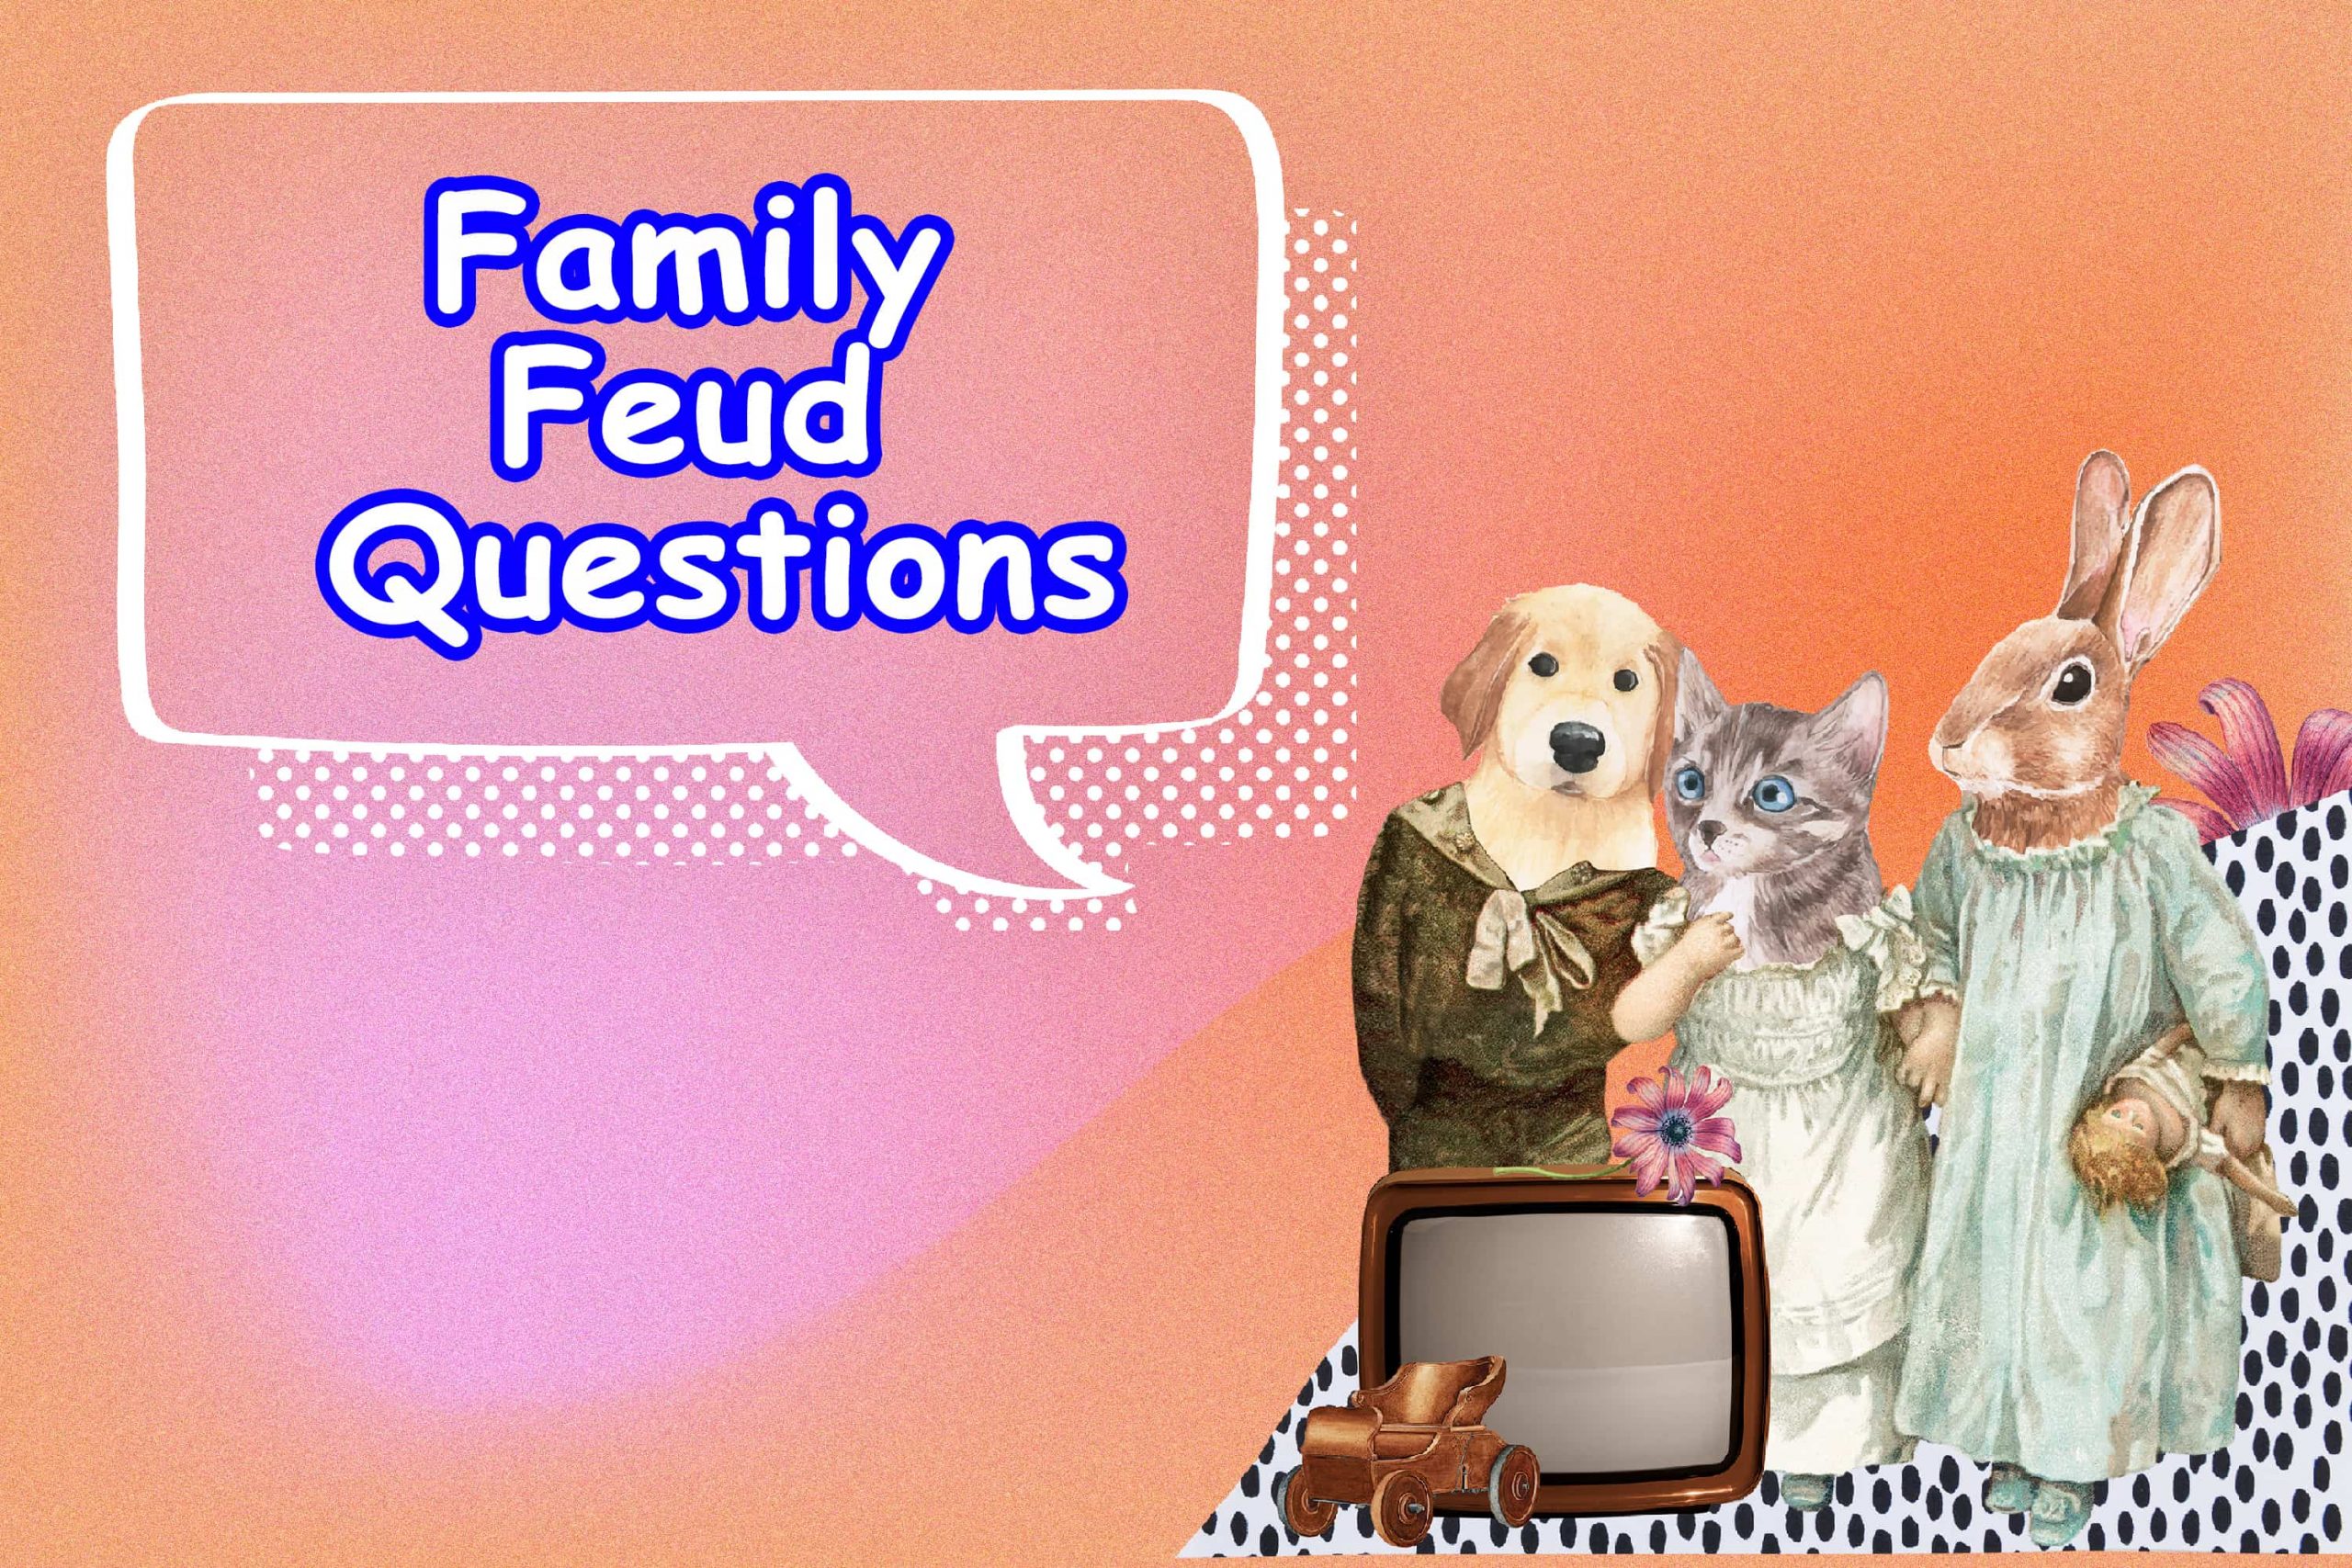 How to set up sudden death questions family feud powerpoint - plmper